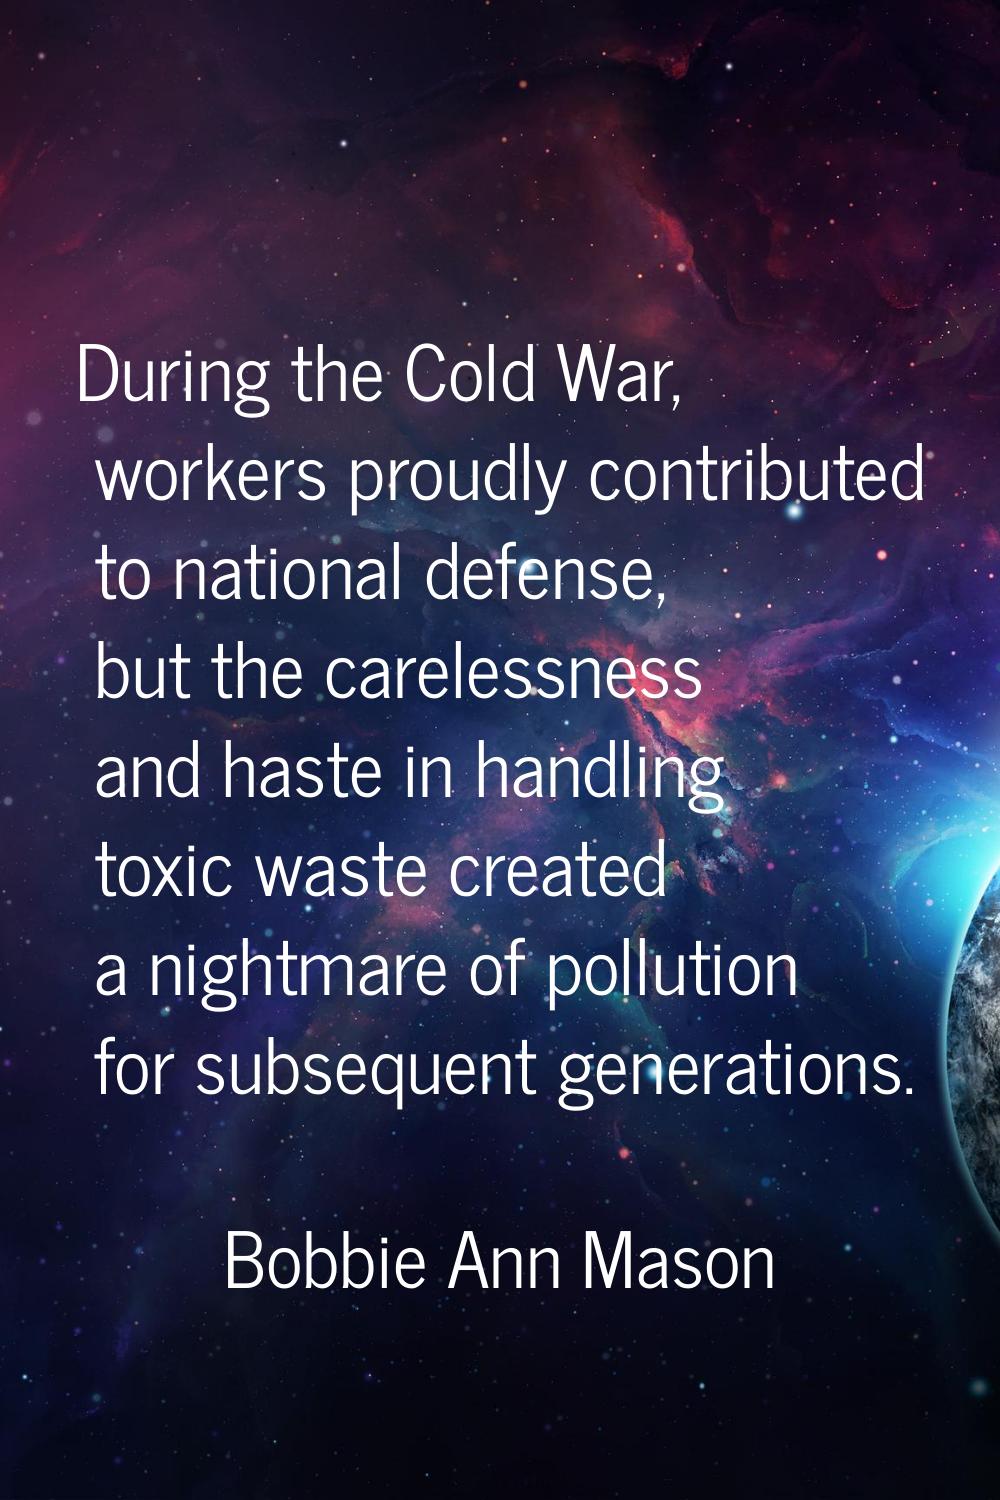 During the Cold War, workers proudly contributed to national defense, but the carelessness and hast